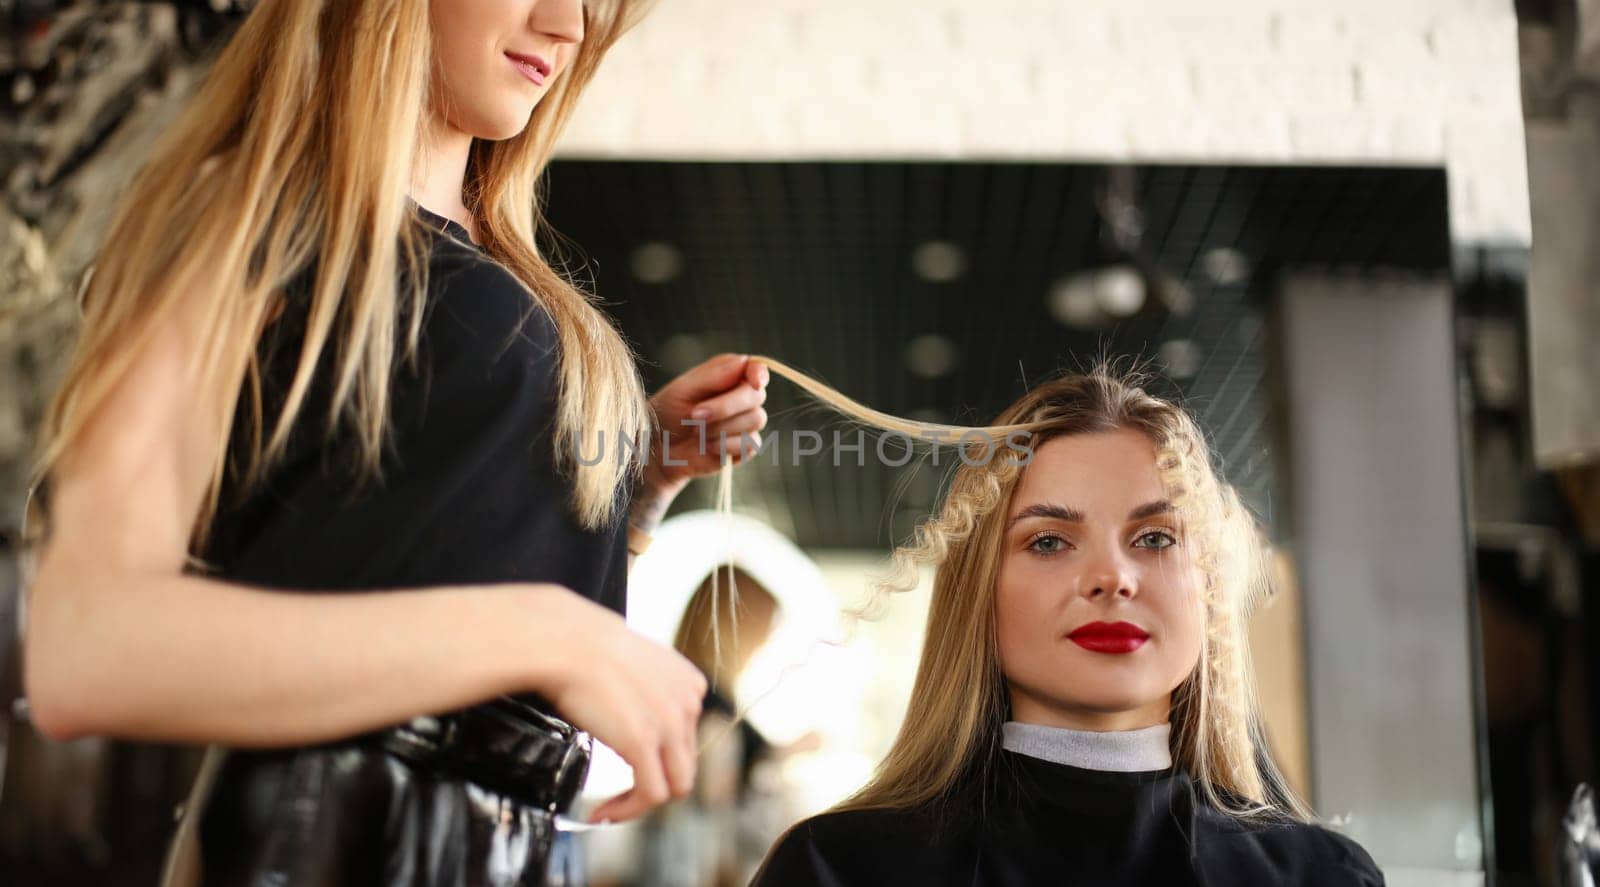 Beautiful Woman Getting Curly Hairstyle in Salon. Hairdresser Curling Hair for Young Female Client. Hairstylist Making Wavy Hairdo. Styling Curls for Girl with Red Lipstick Looking at Camera Shot